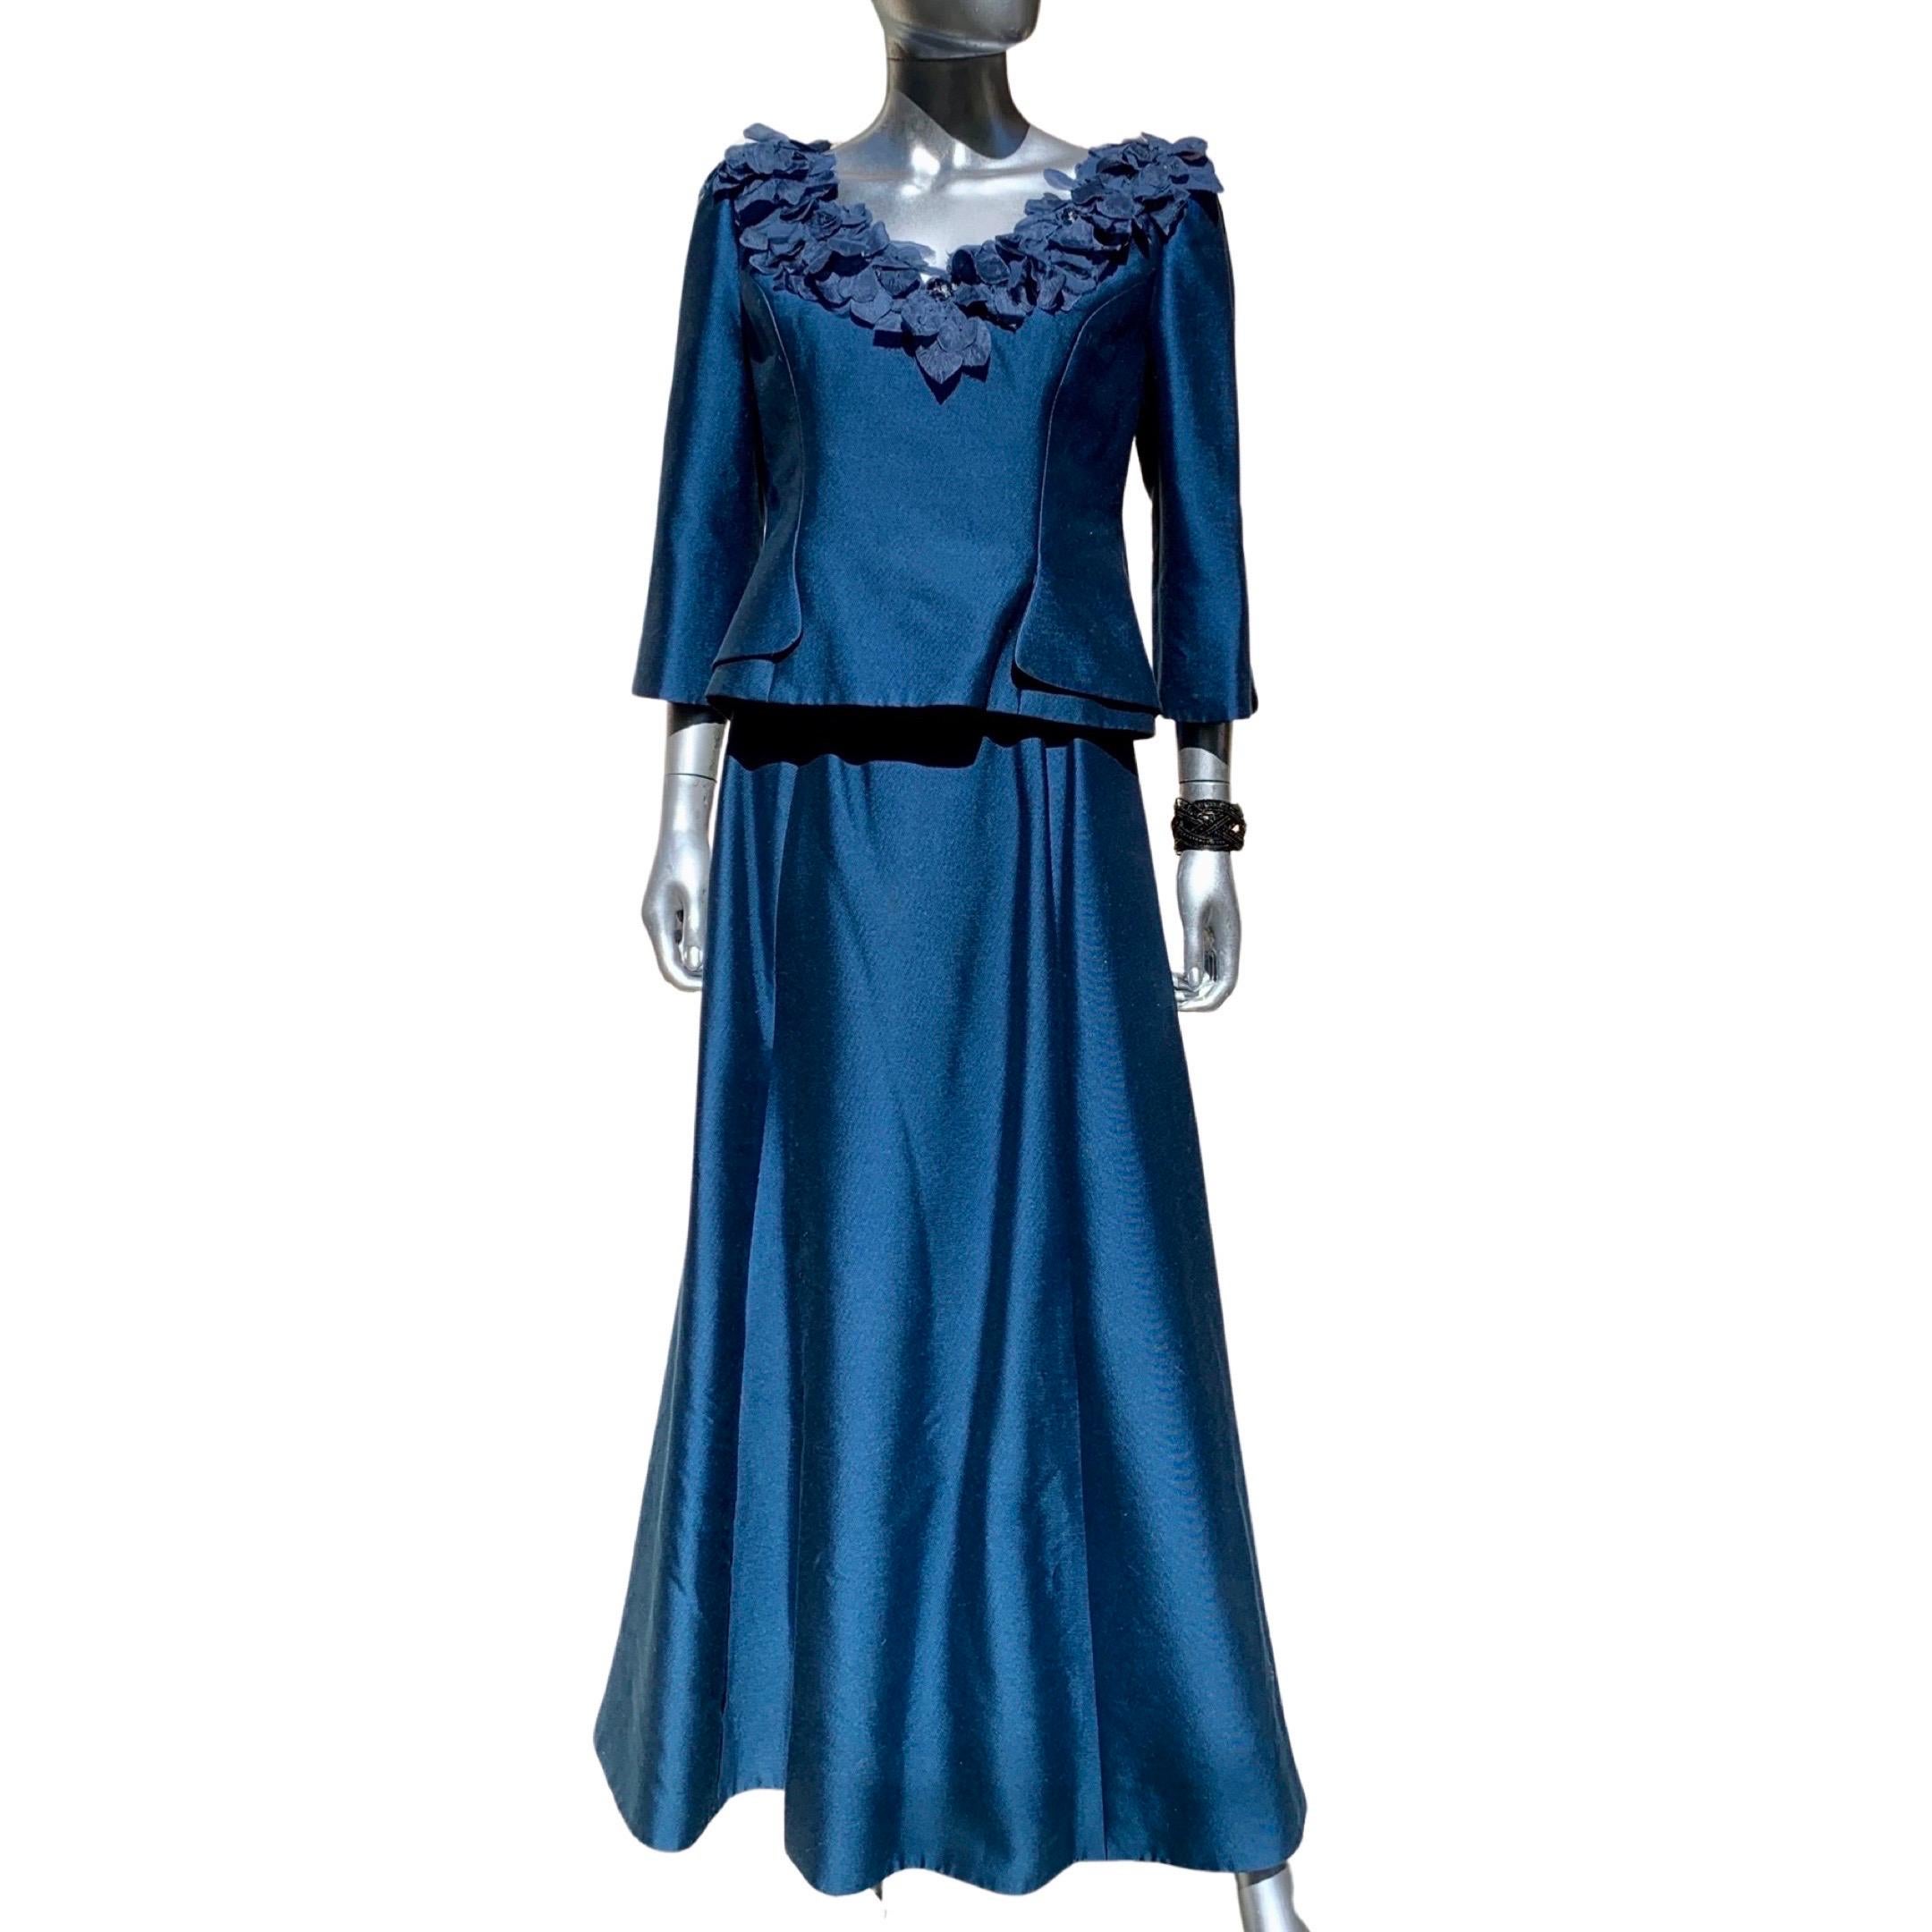 Three Piece Saphire Blue Couture Evening Ensemble by Lily Samii SF Size 8 For Sale 8